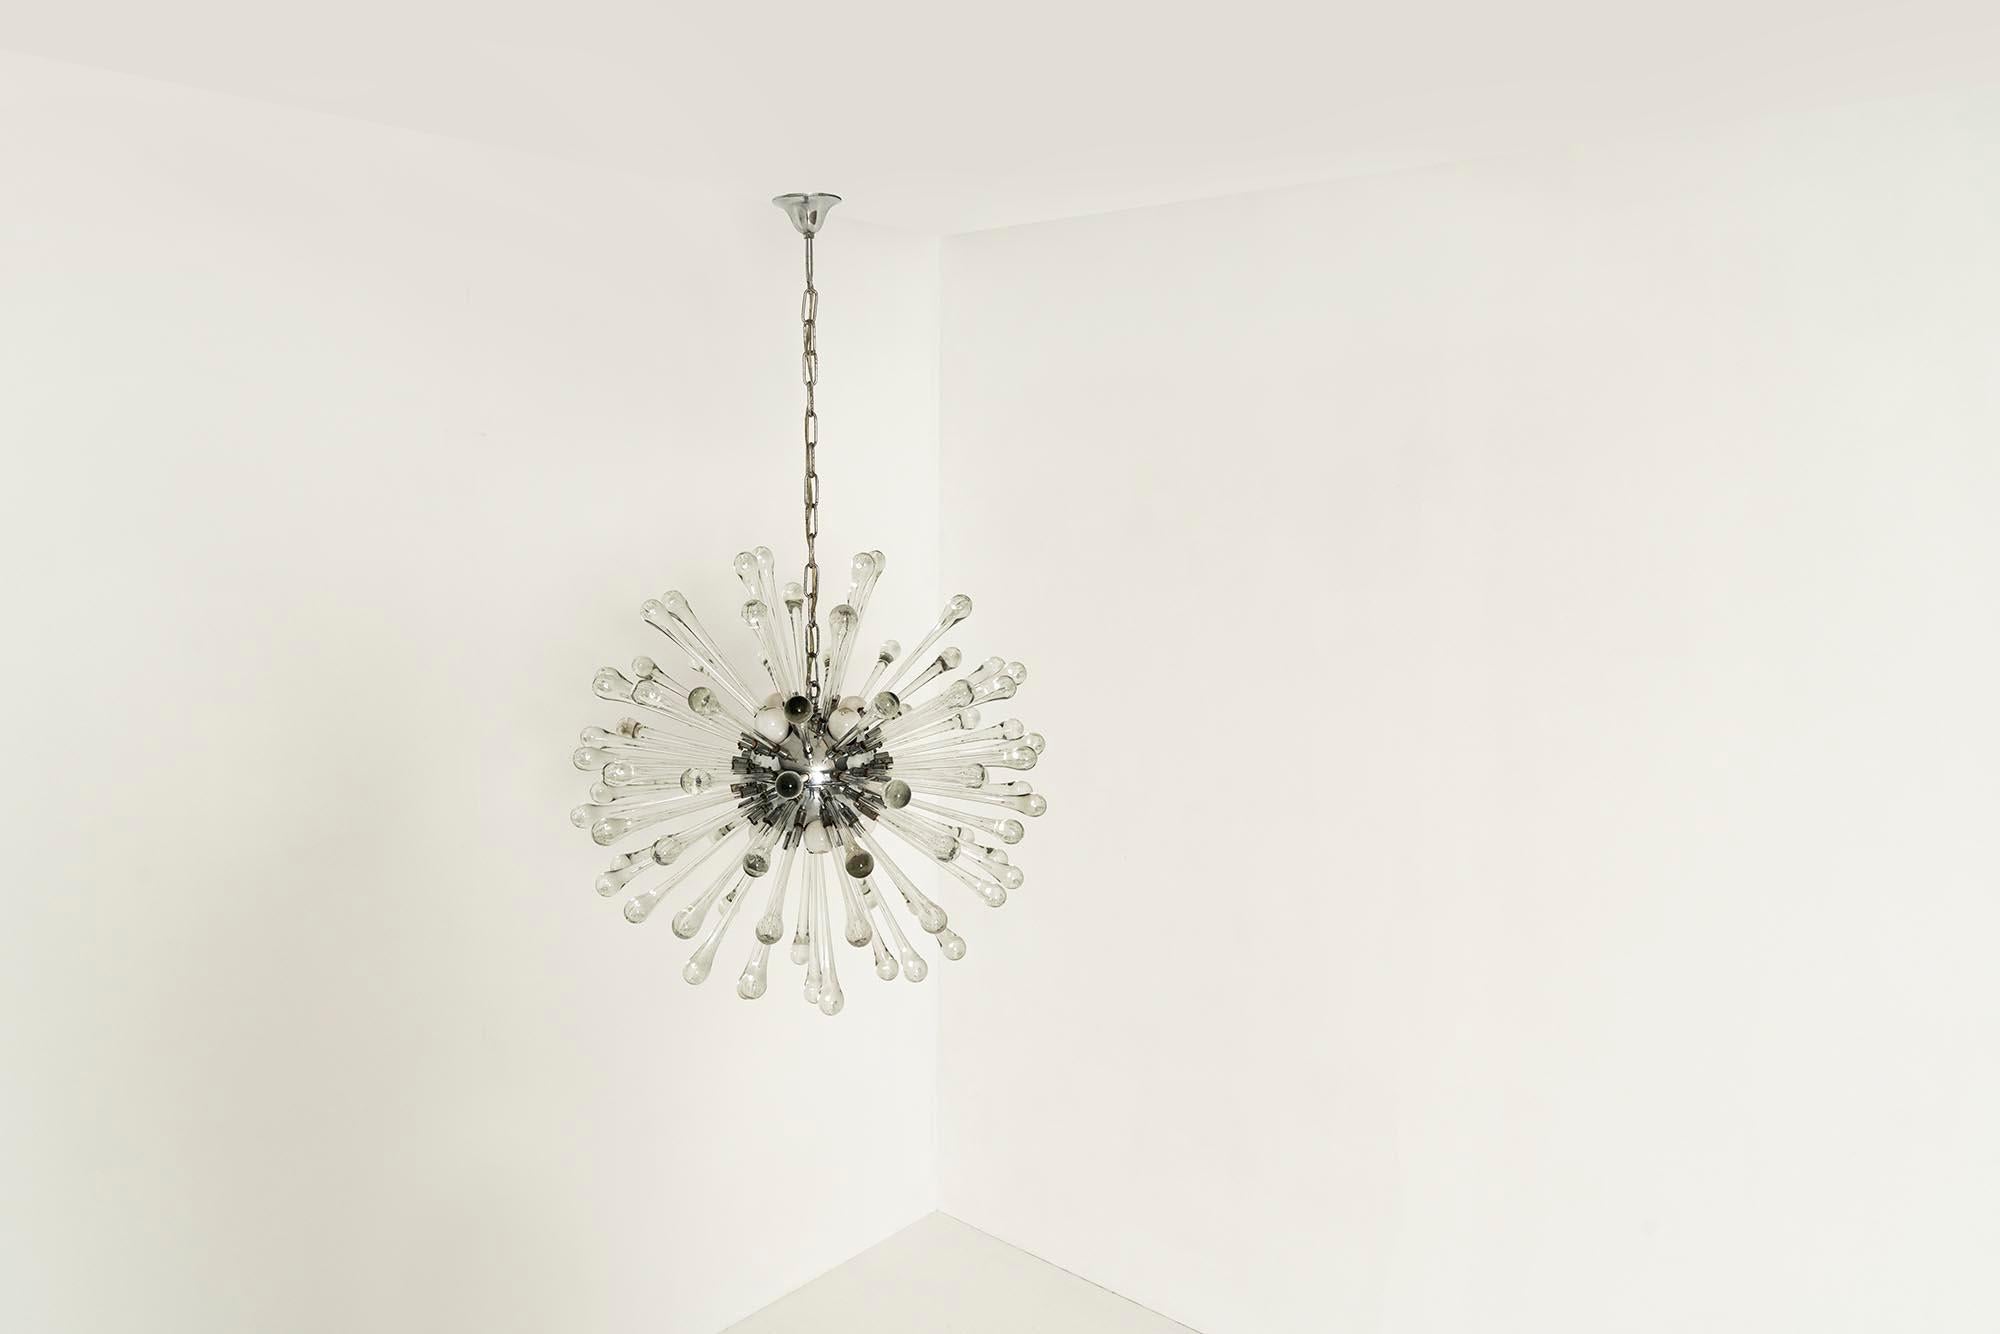 Sputnik Chandelier with Murano Glass Drops, Italy 1960s For Sale 1